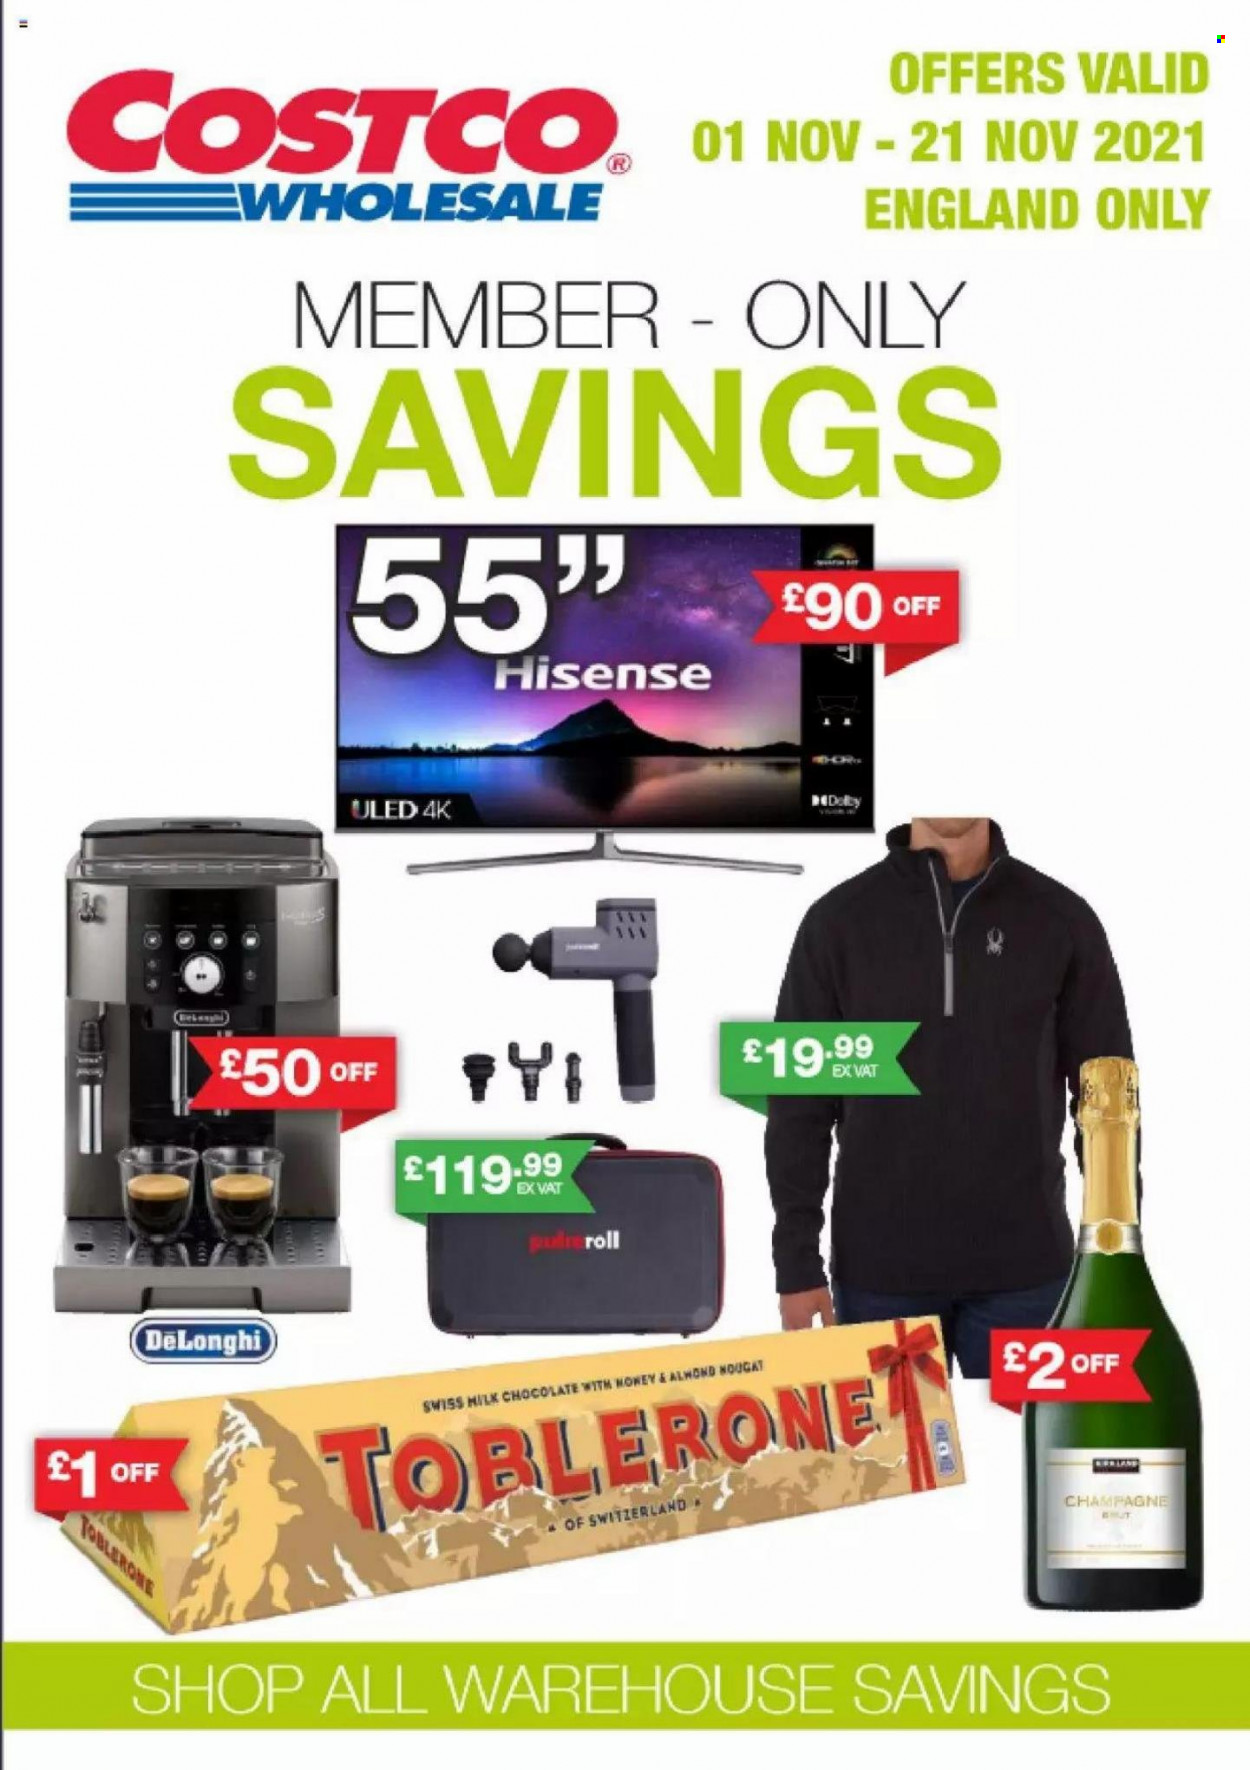 thumbnail - Costco offer  - 01/11/2021 - 21/11/2021 - Sales products - chocolate, nougat, Toblerone, honey, champagne, Hisense, De'Longhi. Page 1.